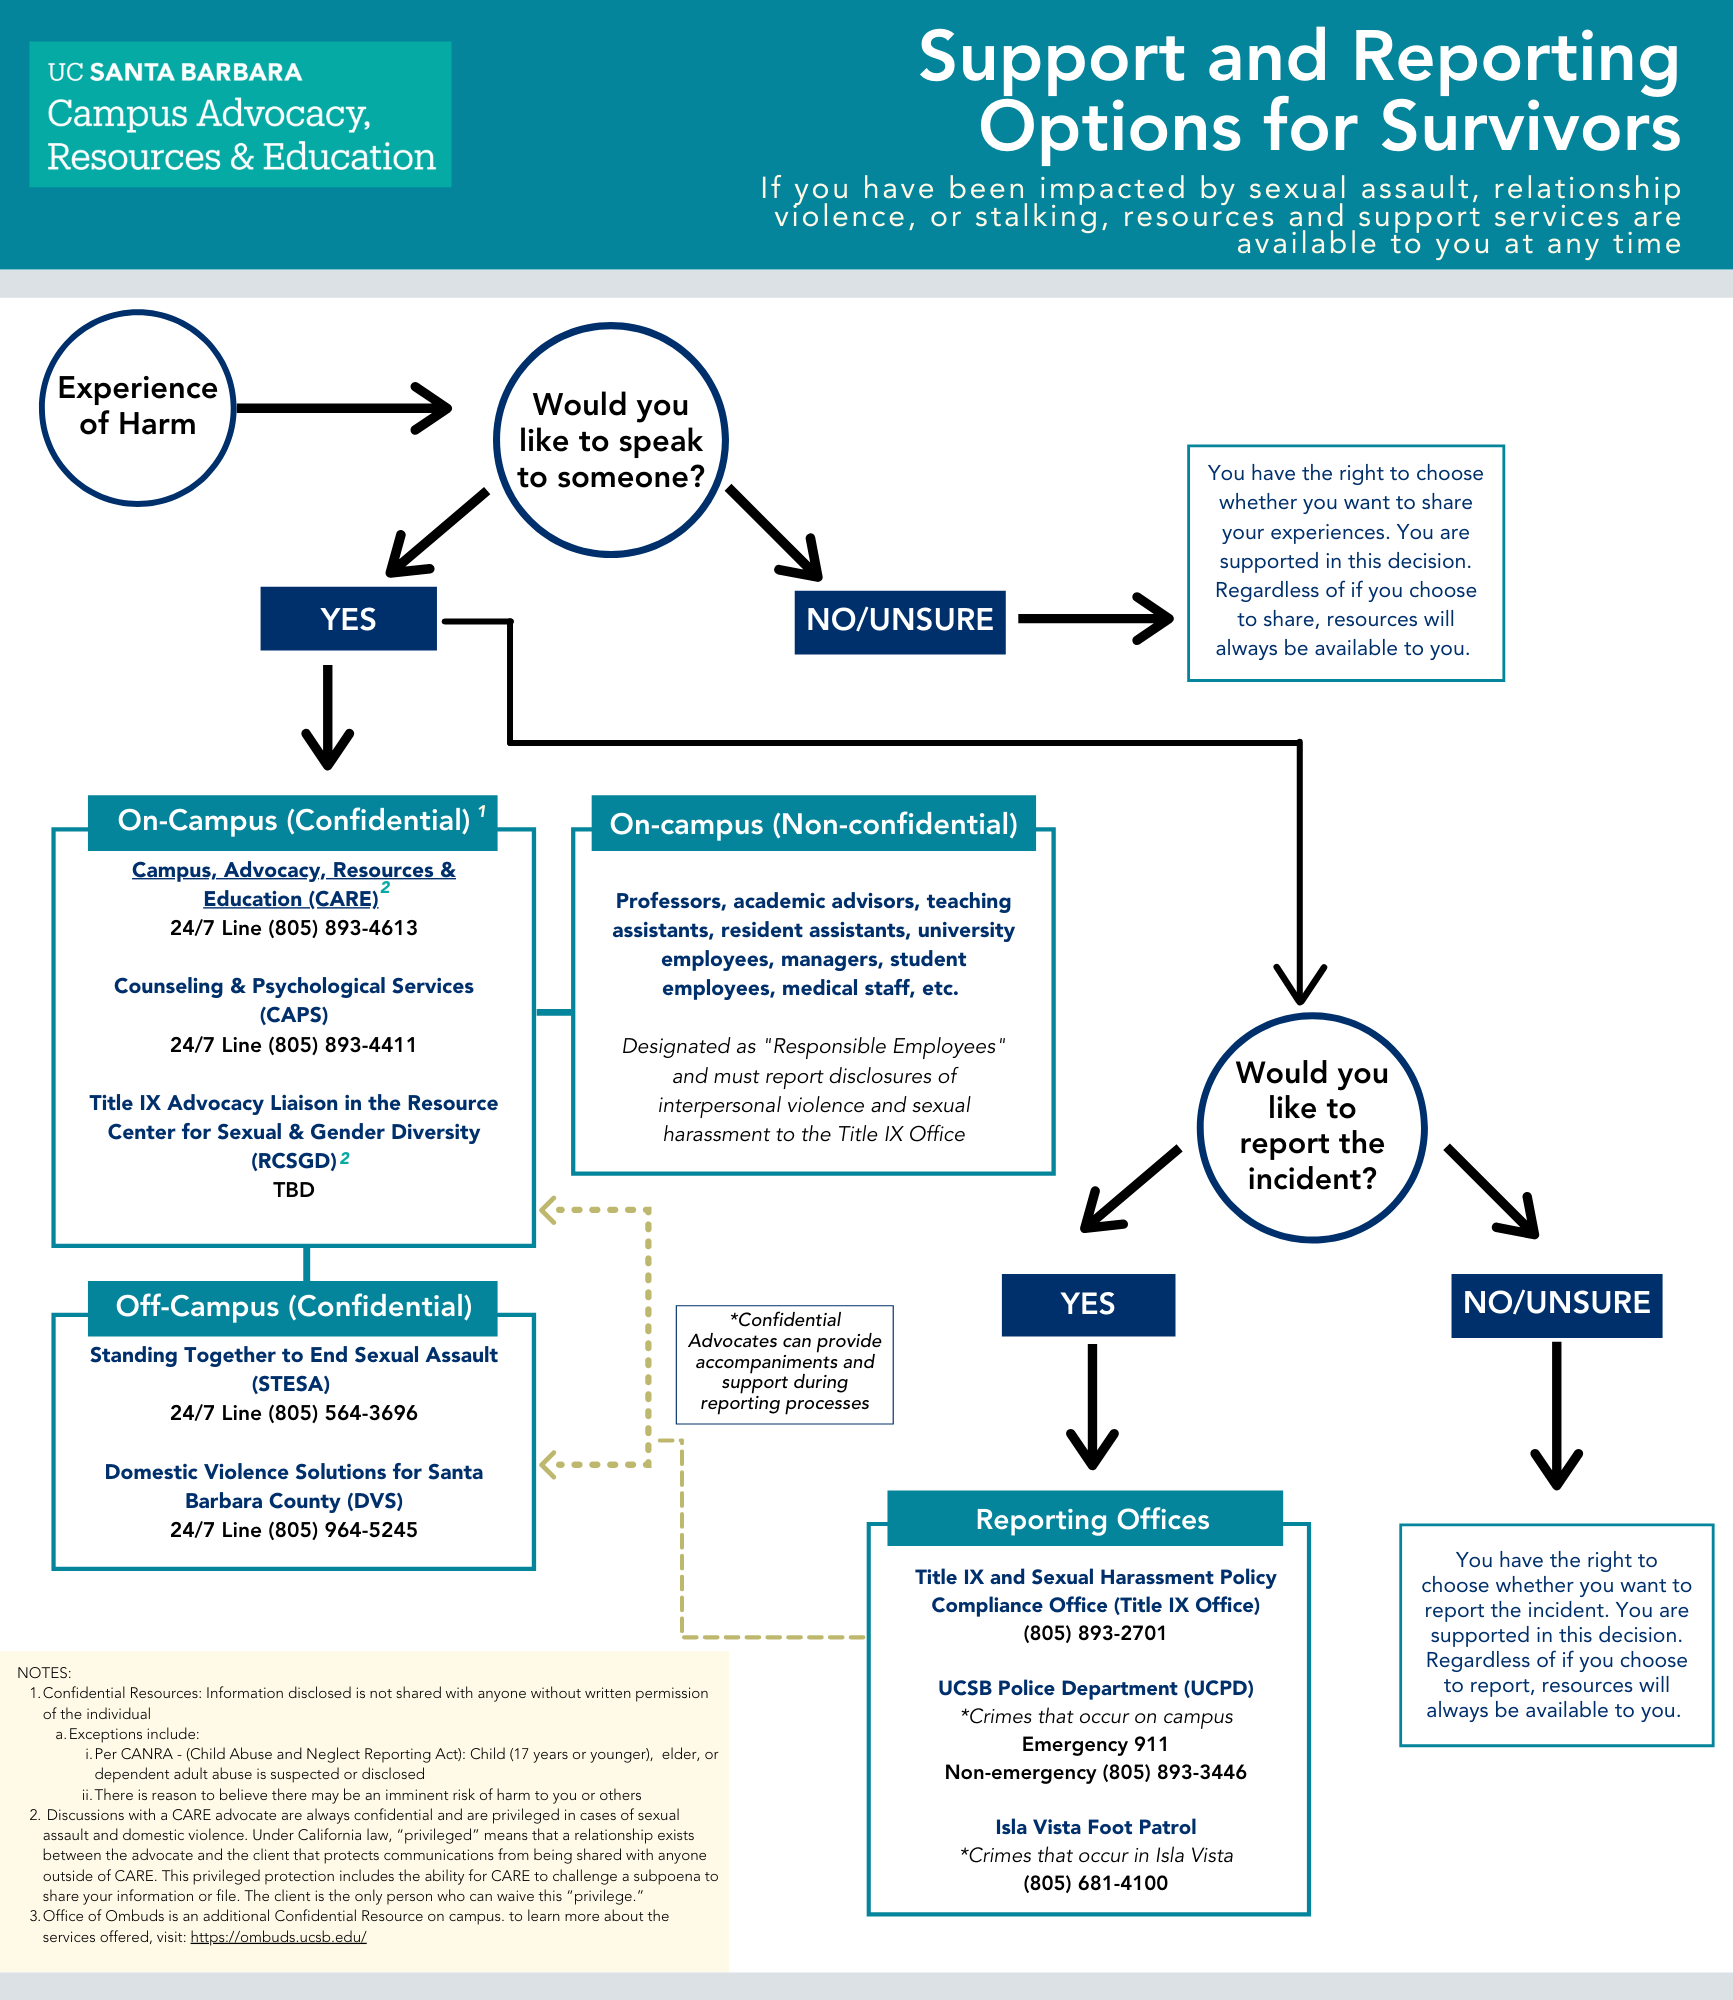 Support and Reporting Options for Survivors Flowchart